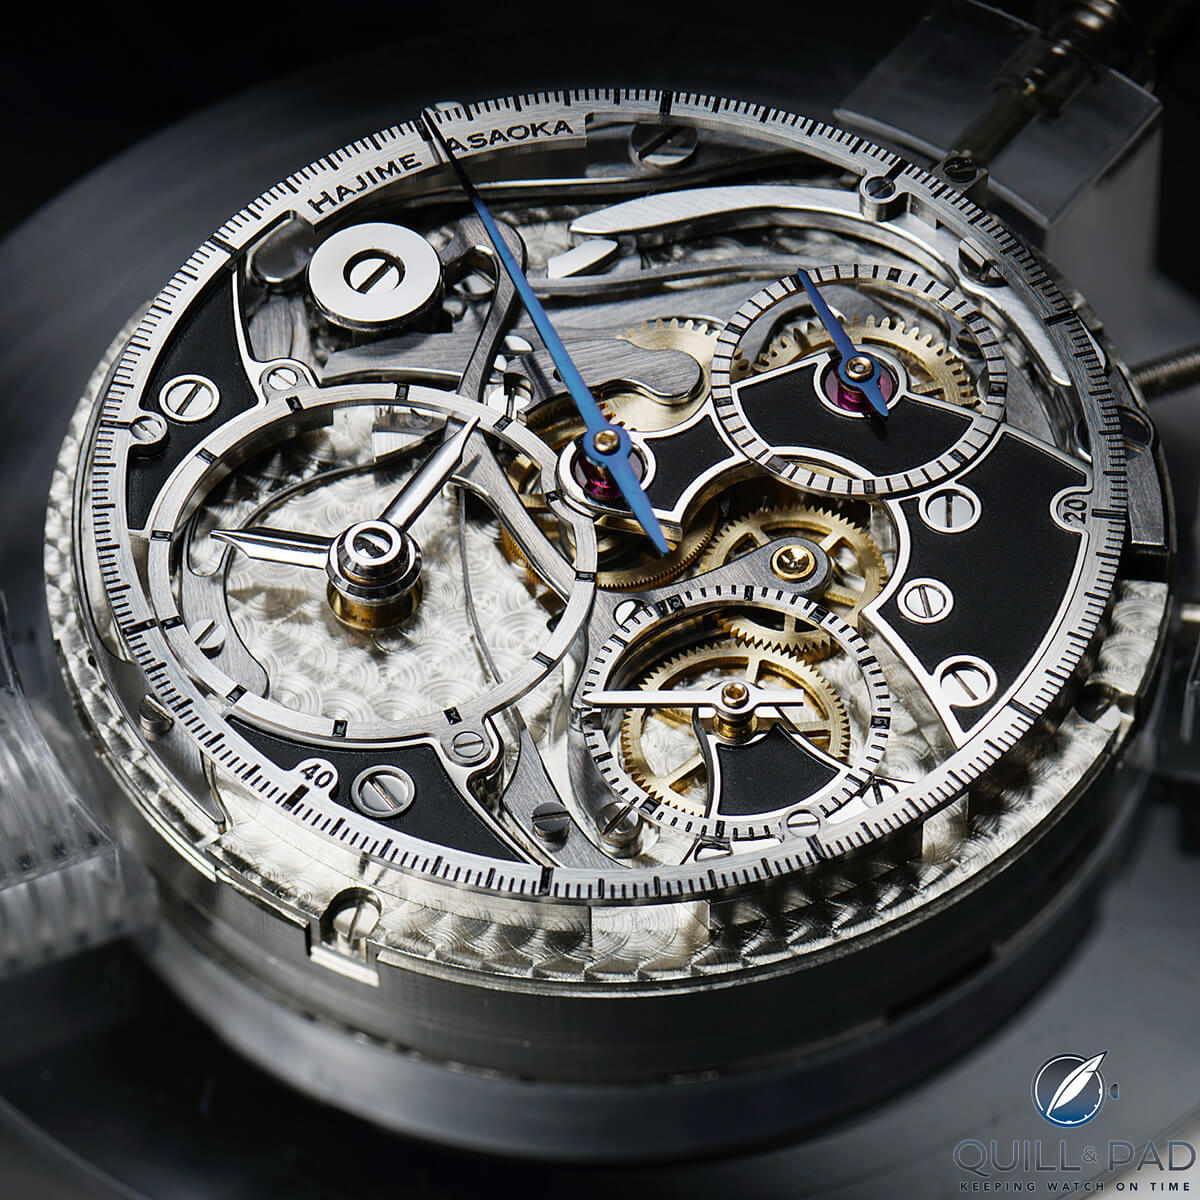 Uncased Hajime Asaoka Chronograph movement, note the beautifully sculptured hour and minute hands